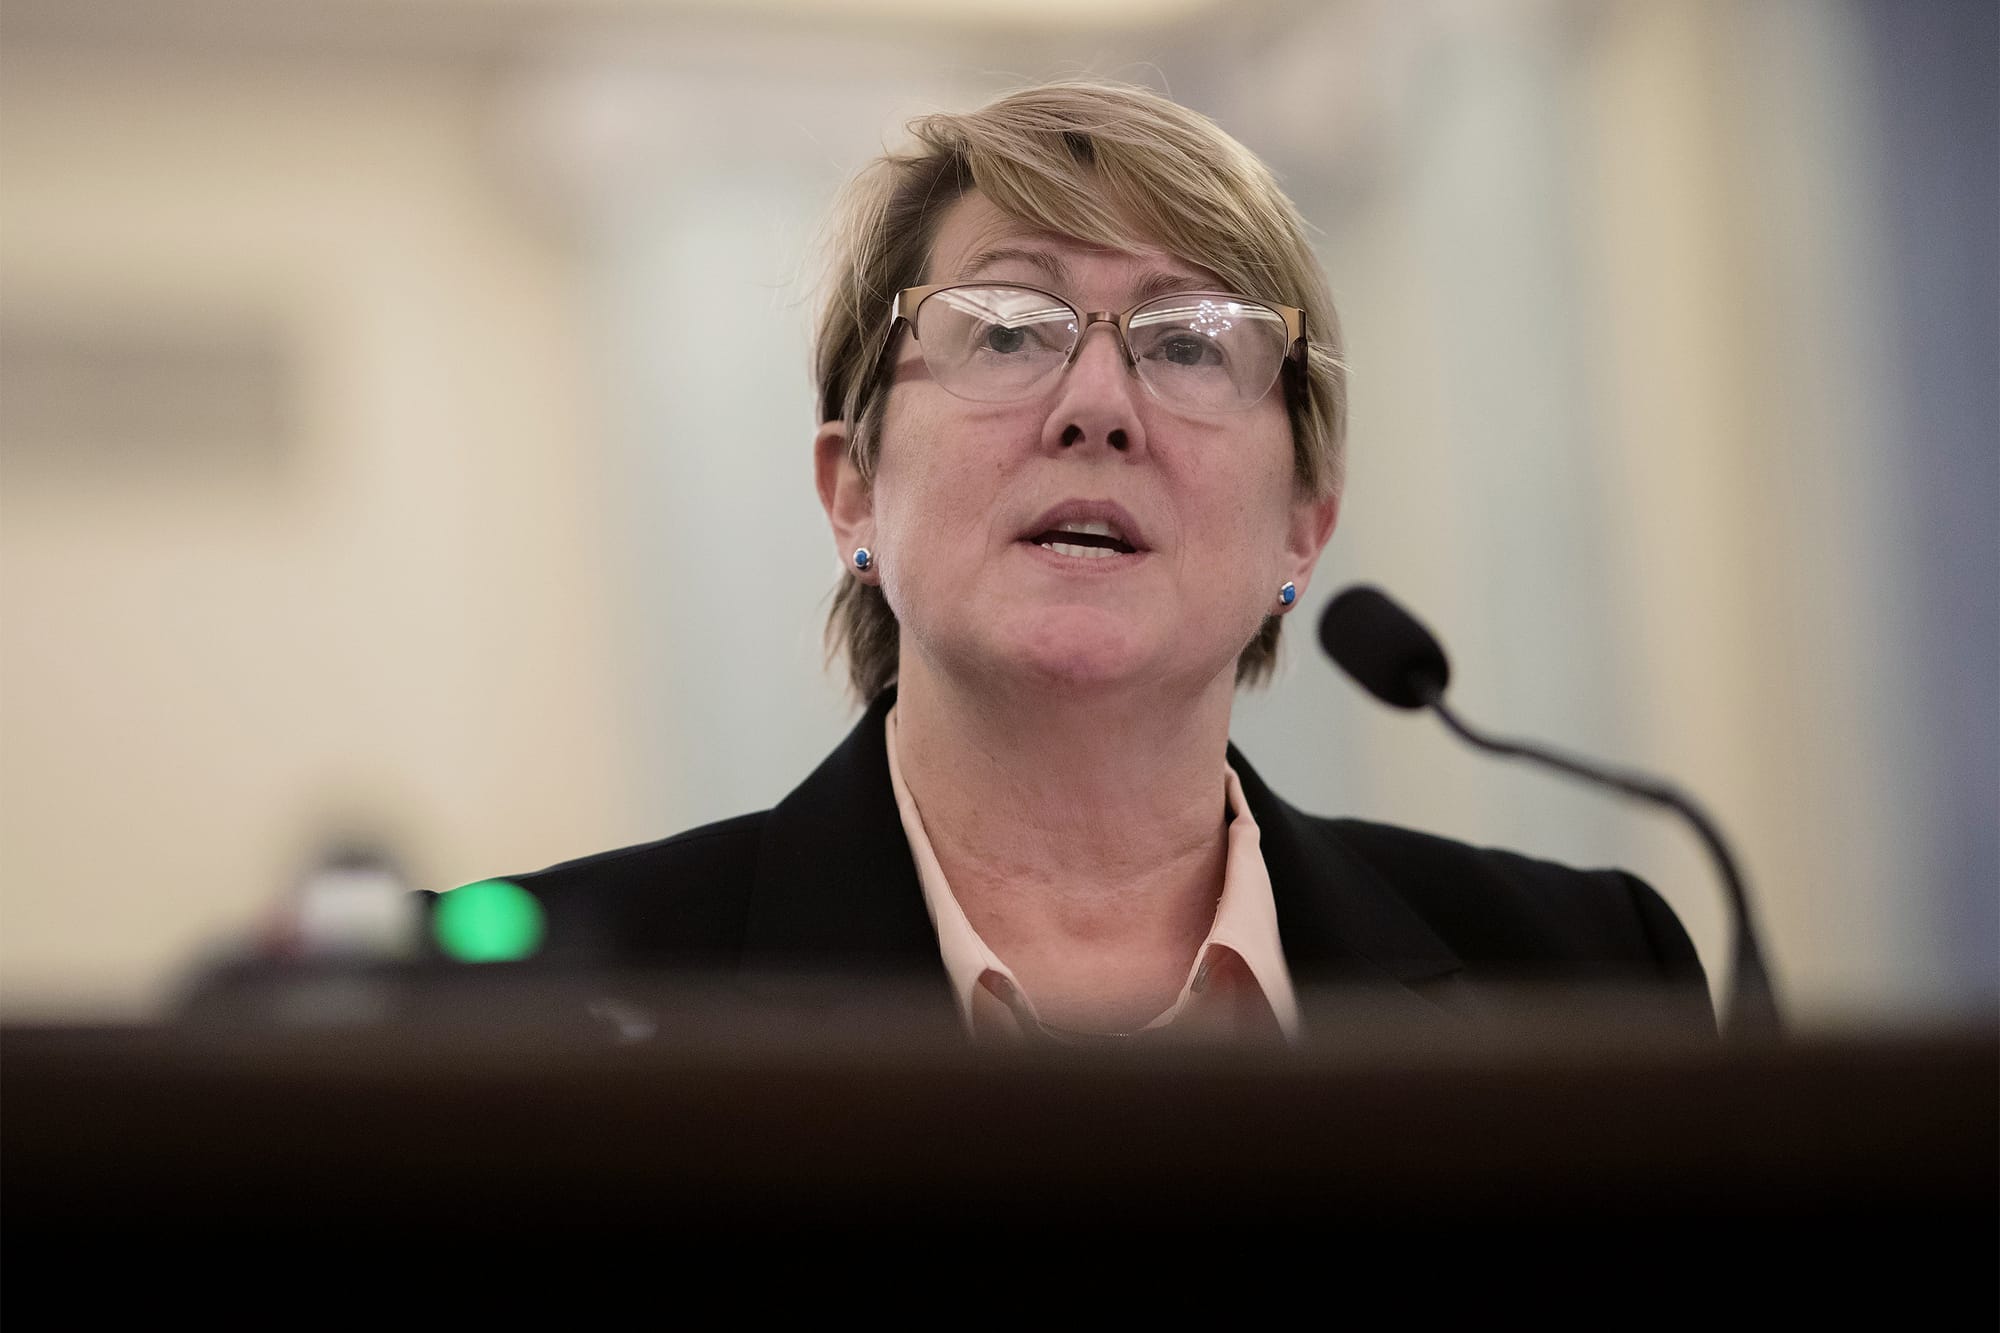 Heidi King, deputy administrator of the National Highway Traffic Safety Administration (NHTSA), speaks during a Senate Commerce Committee hearing on NHTSA and automaker efforts to repair defective Takata Corp. air bag inflators in Washington, D.C., U.S., on Tuesday, March 20, 2018. Takata last month agreed to pay as much as $650 million to settle claims in 44 states and the District of Columbia for defective air bags that can explode in car crashes, sending metal shards flying. Photographer: Eric Thayer/Bloomberg via Getty Images